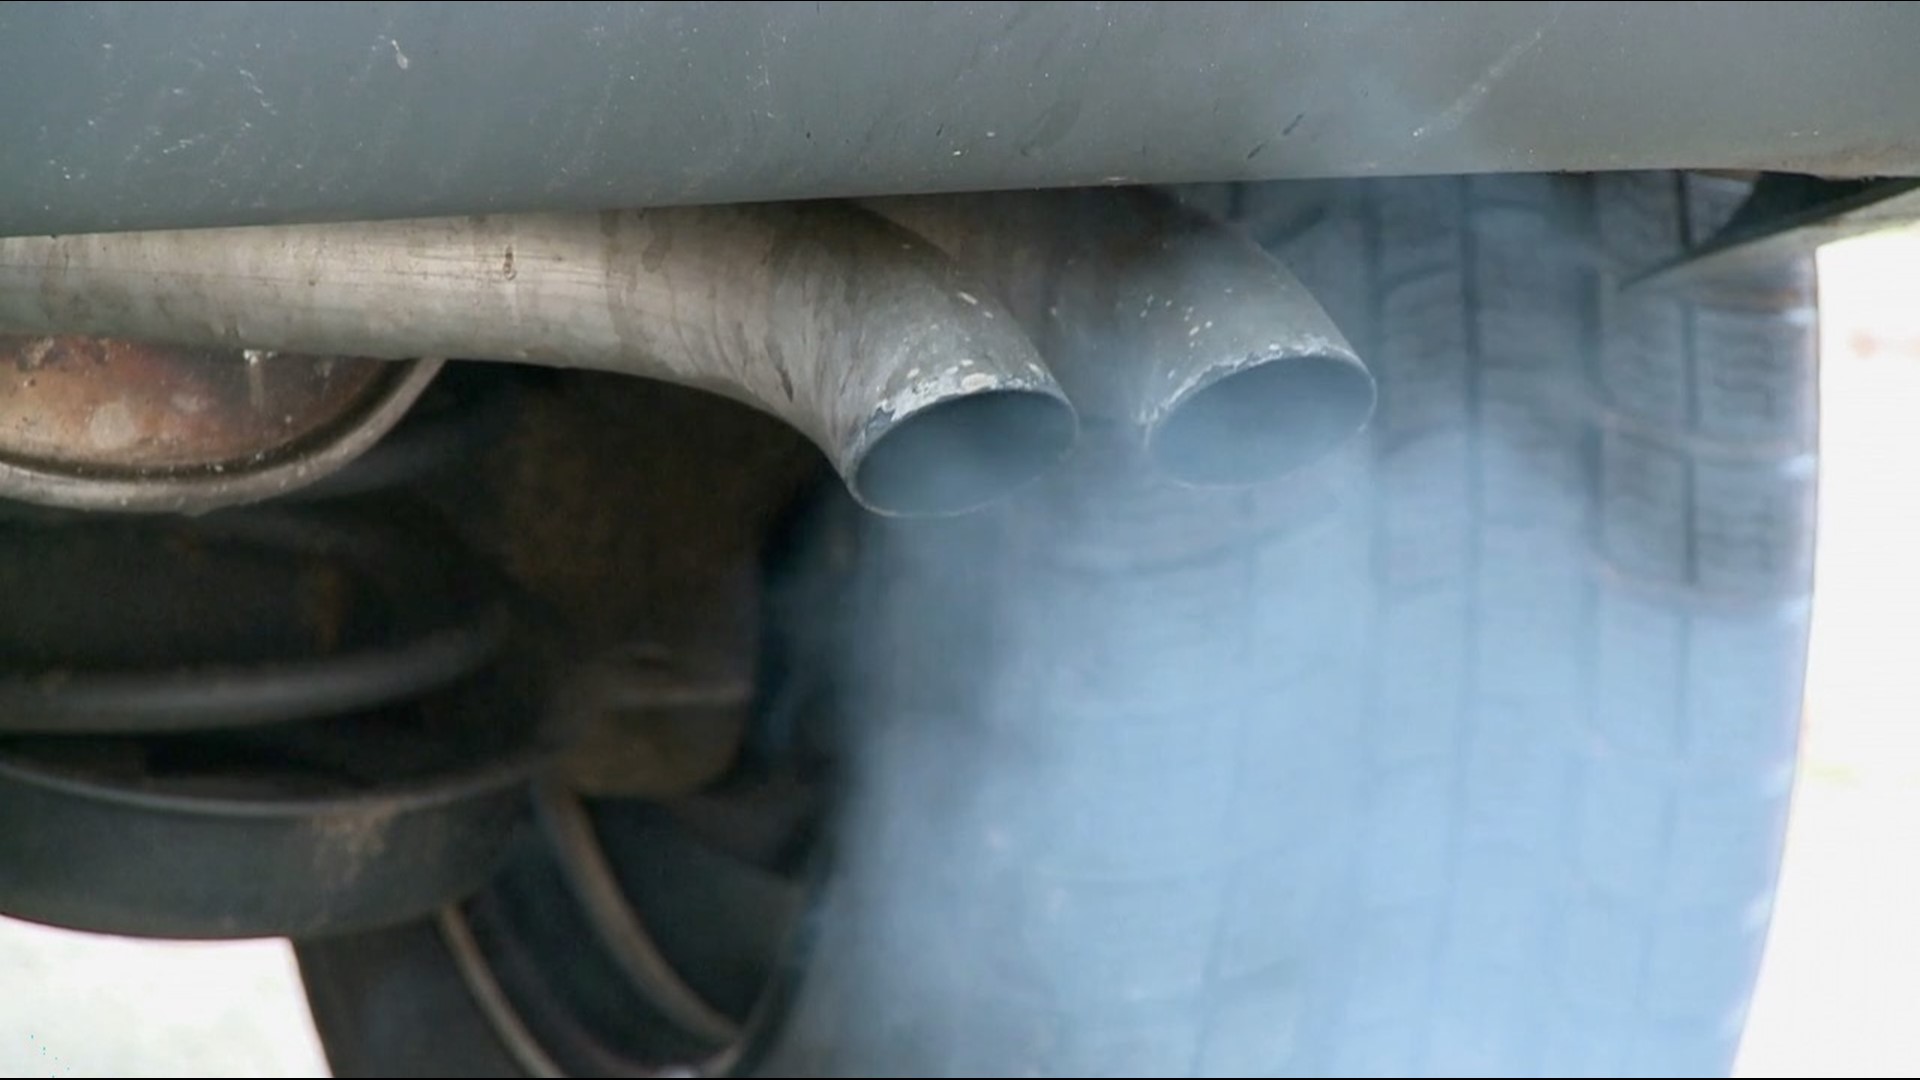 Is warming your car necessary? Buzz60's Lenneia Batiste has more from experts.